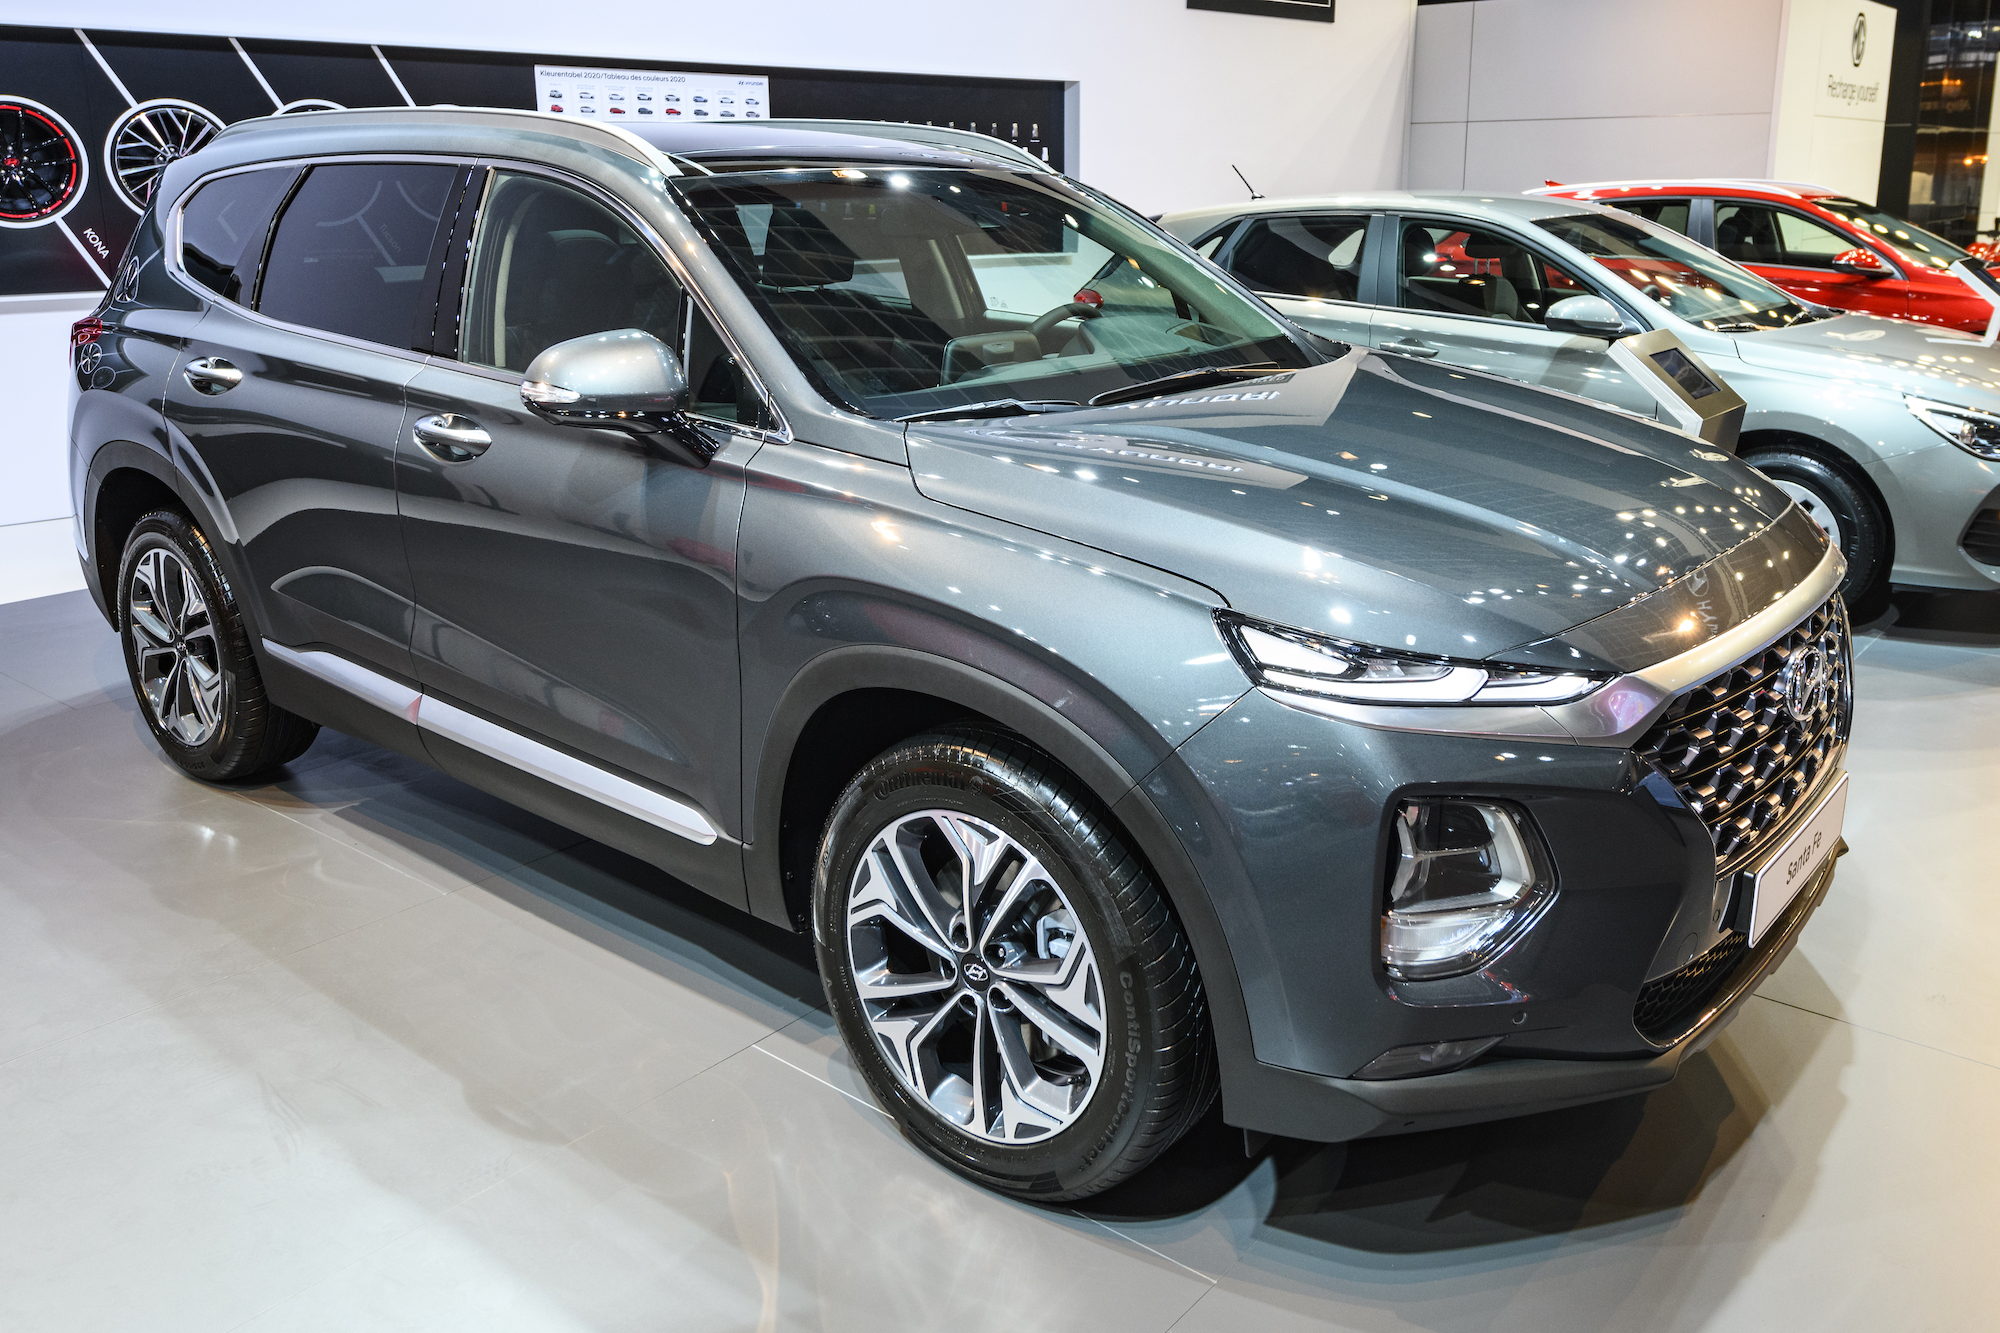 A dark-gray metallic 2020 used Hyundai Santa Fe midsize SUV on display at Brussels Expo on January 9, 2020, in Brussels, Belgium